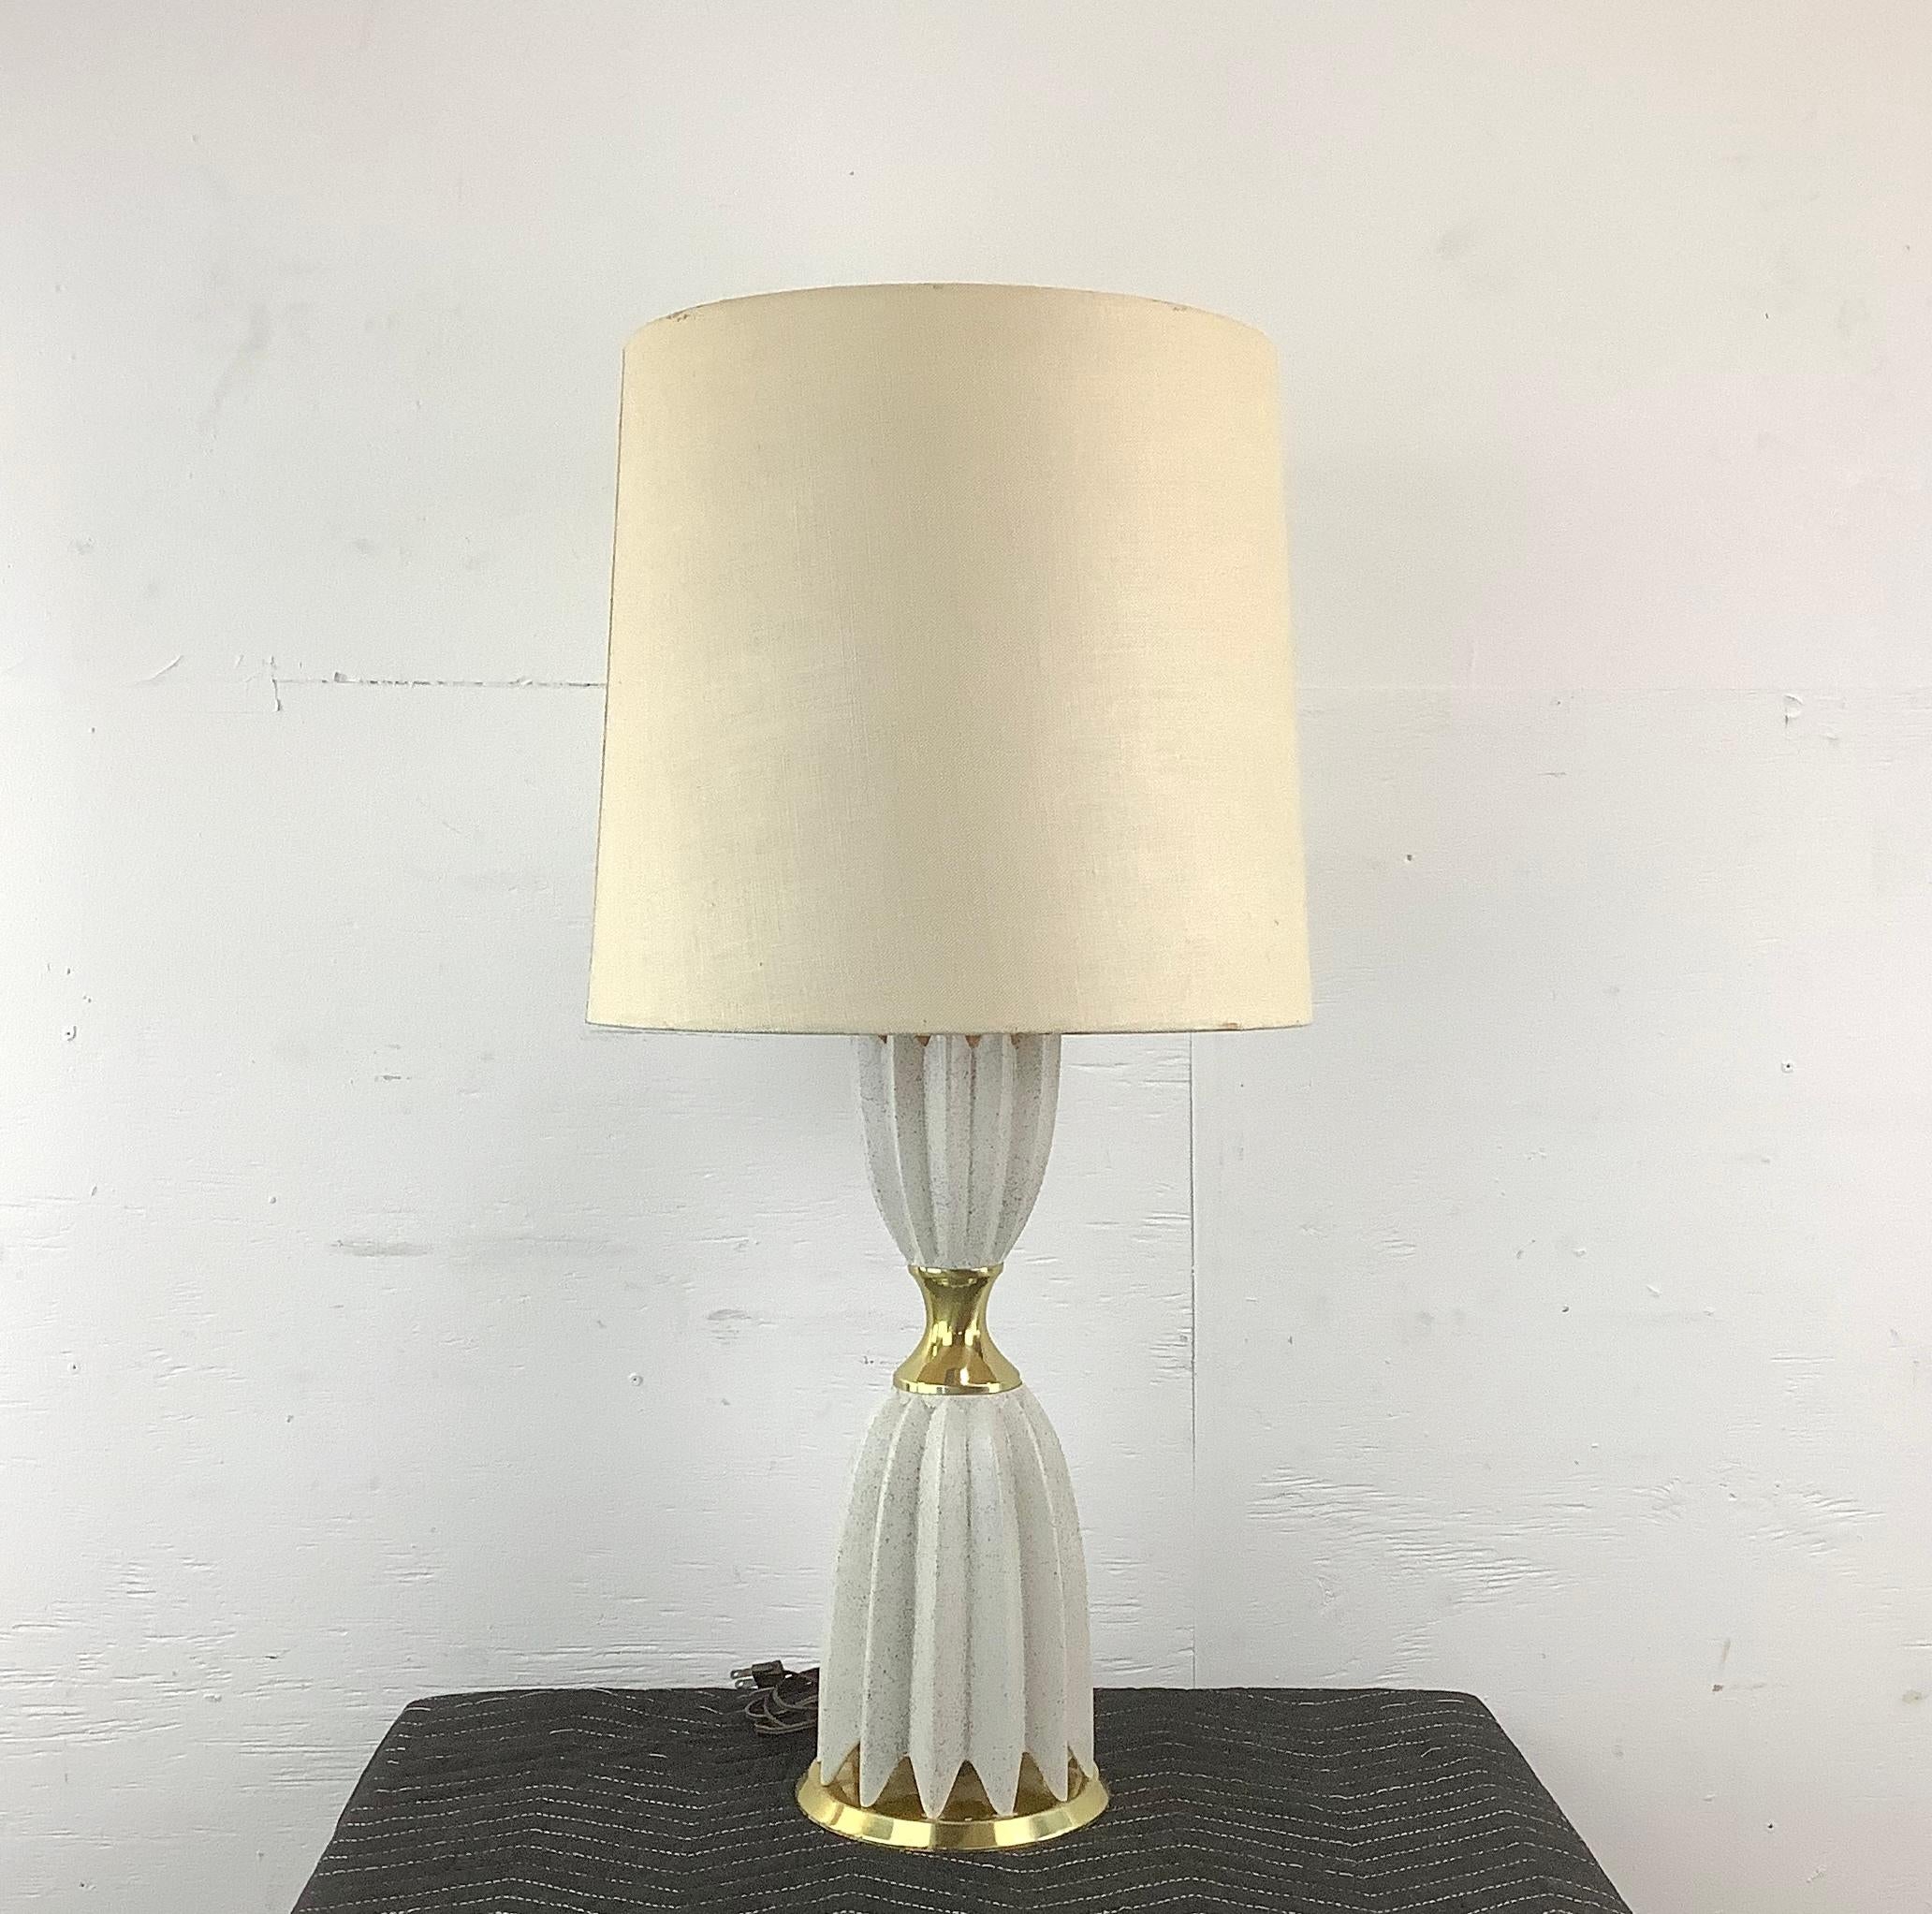 Illuminate your home with the elegance of mid-century modern design with this ceramic and brass table lamp, attributed to the iconic Gerald Thurston as designed for Lightolier. This lamp, with its sleek ceramic body and warm brass accents,